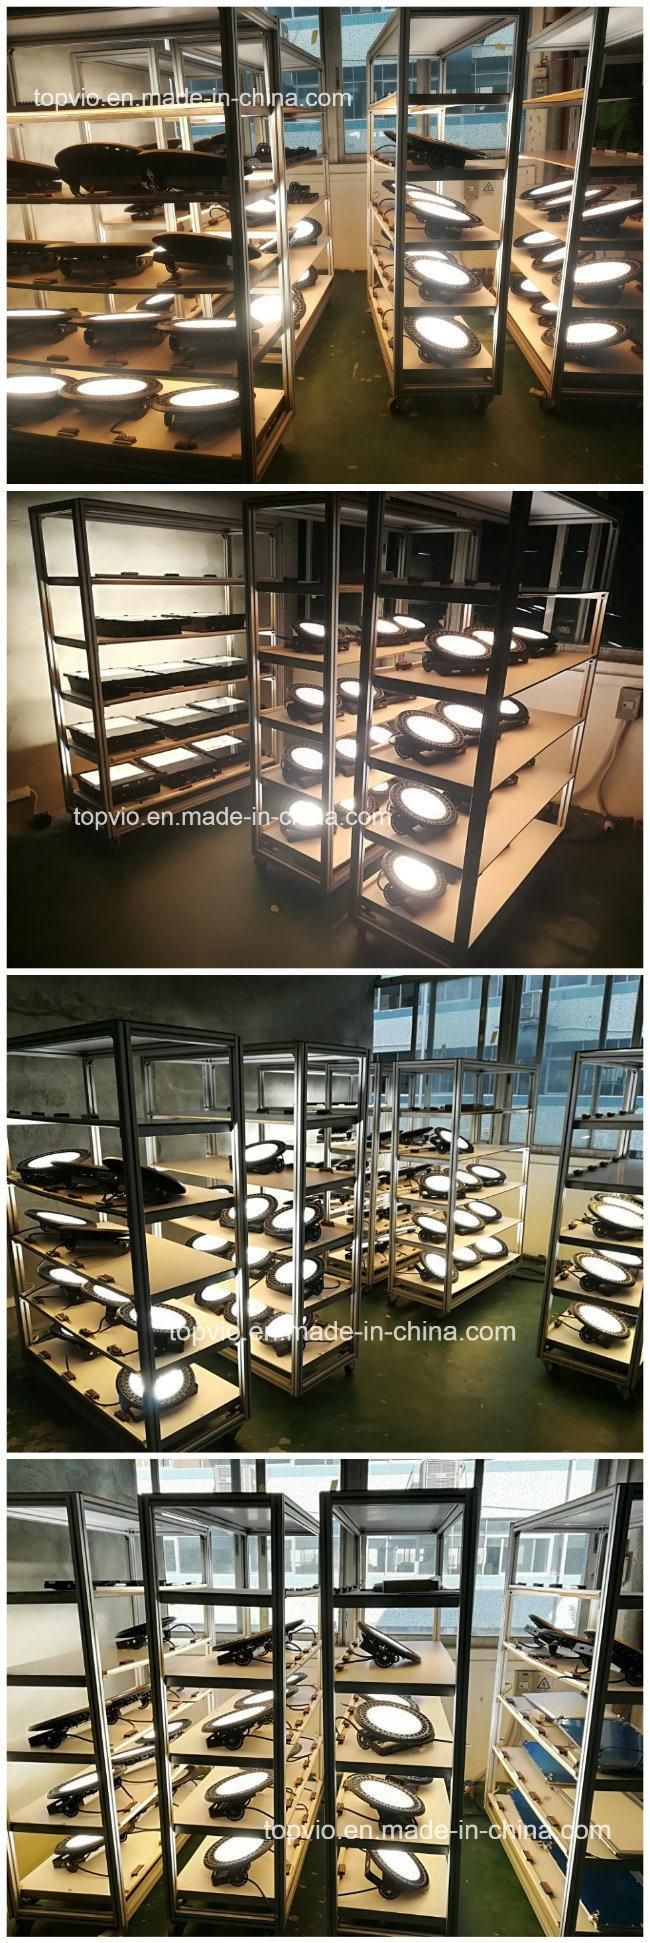 China Manufacturer Warehouse Industrial Dimmable LED High Bay Light 110LMW UFO Highbay Light